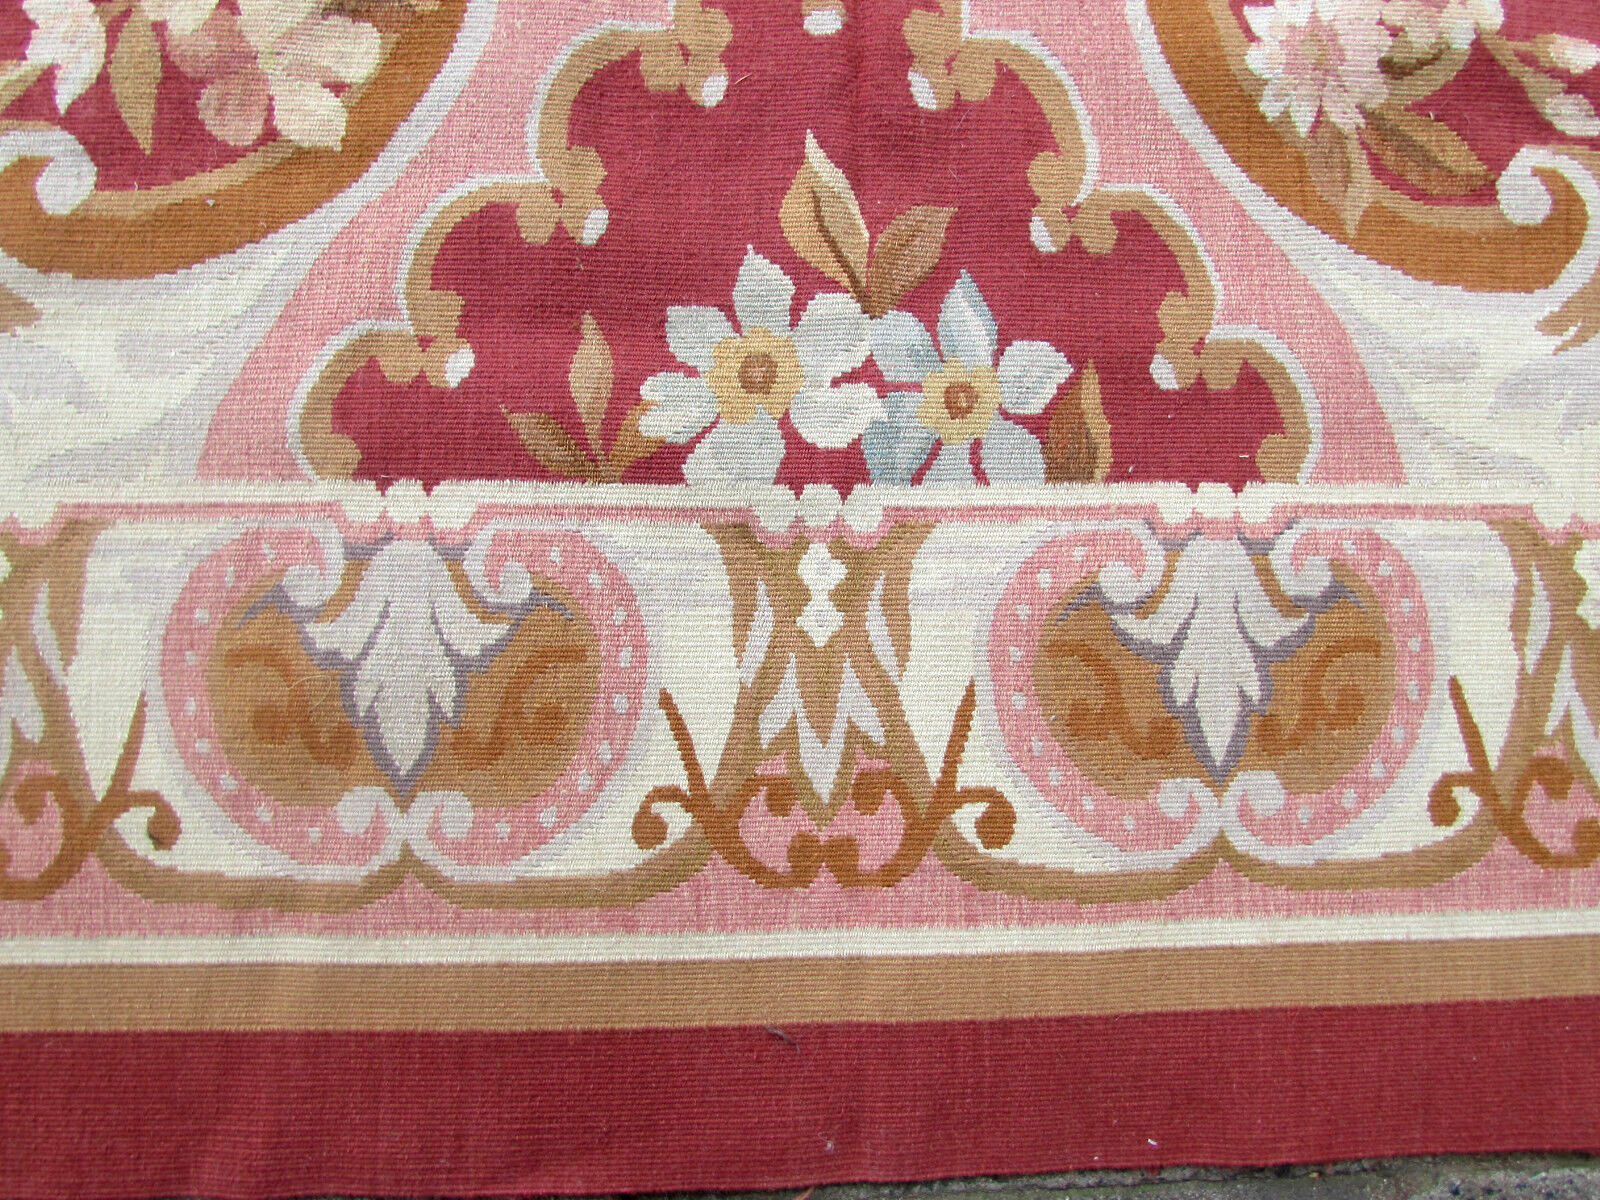 Fine craftsmanship and attention to detail showcased in a close-up of the Aubusson Rug's weaving technique